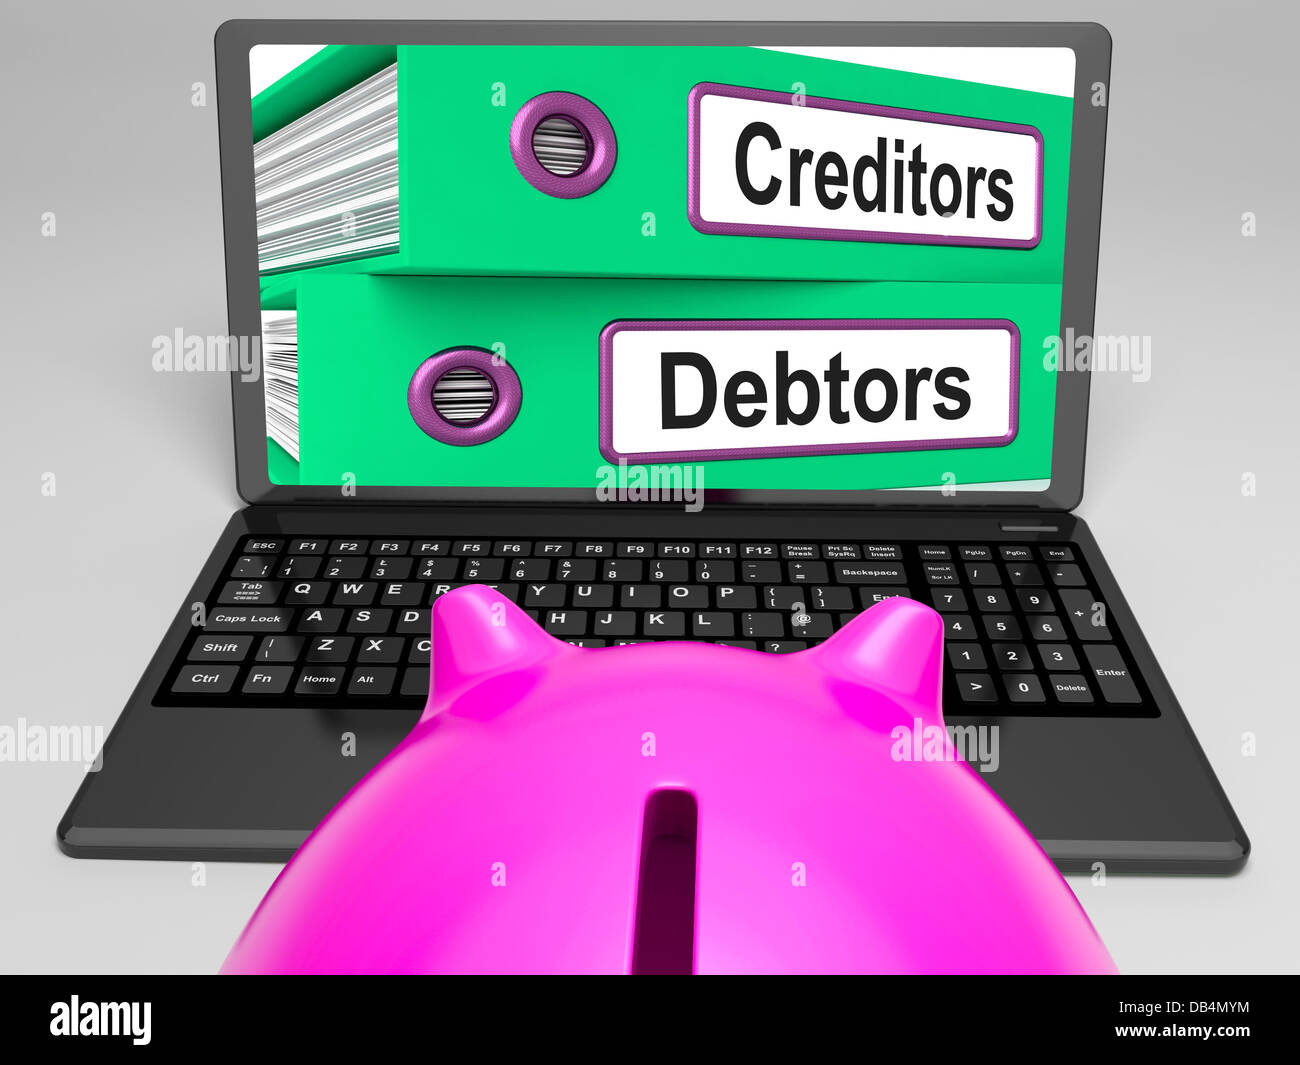 Creditors And Debtors Files On Laptop Shows Financing Stock Photo